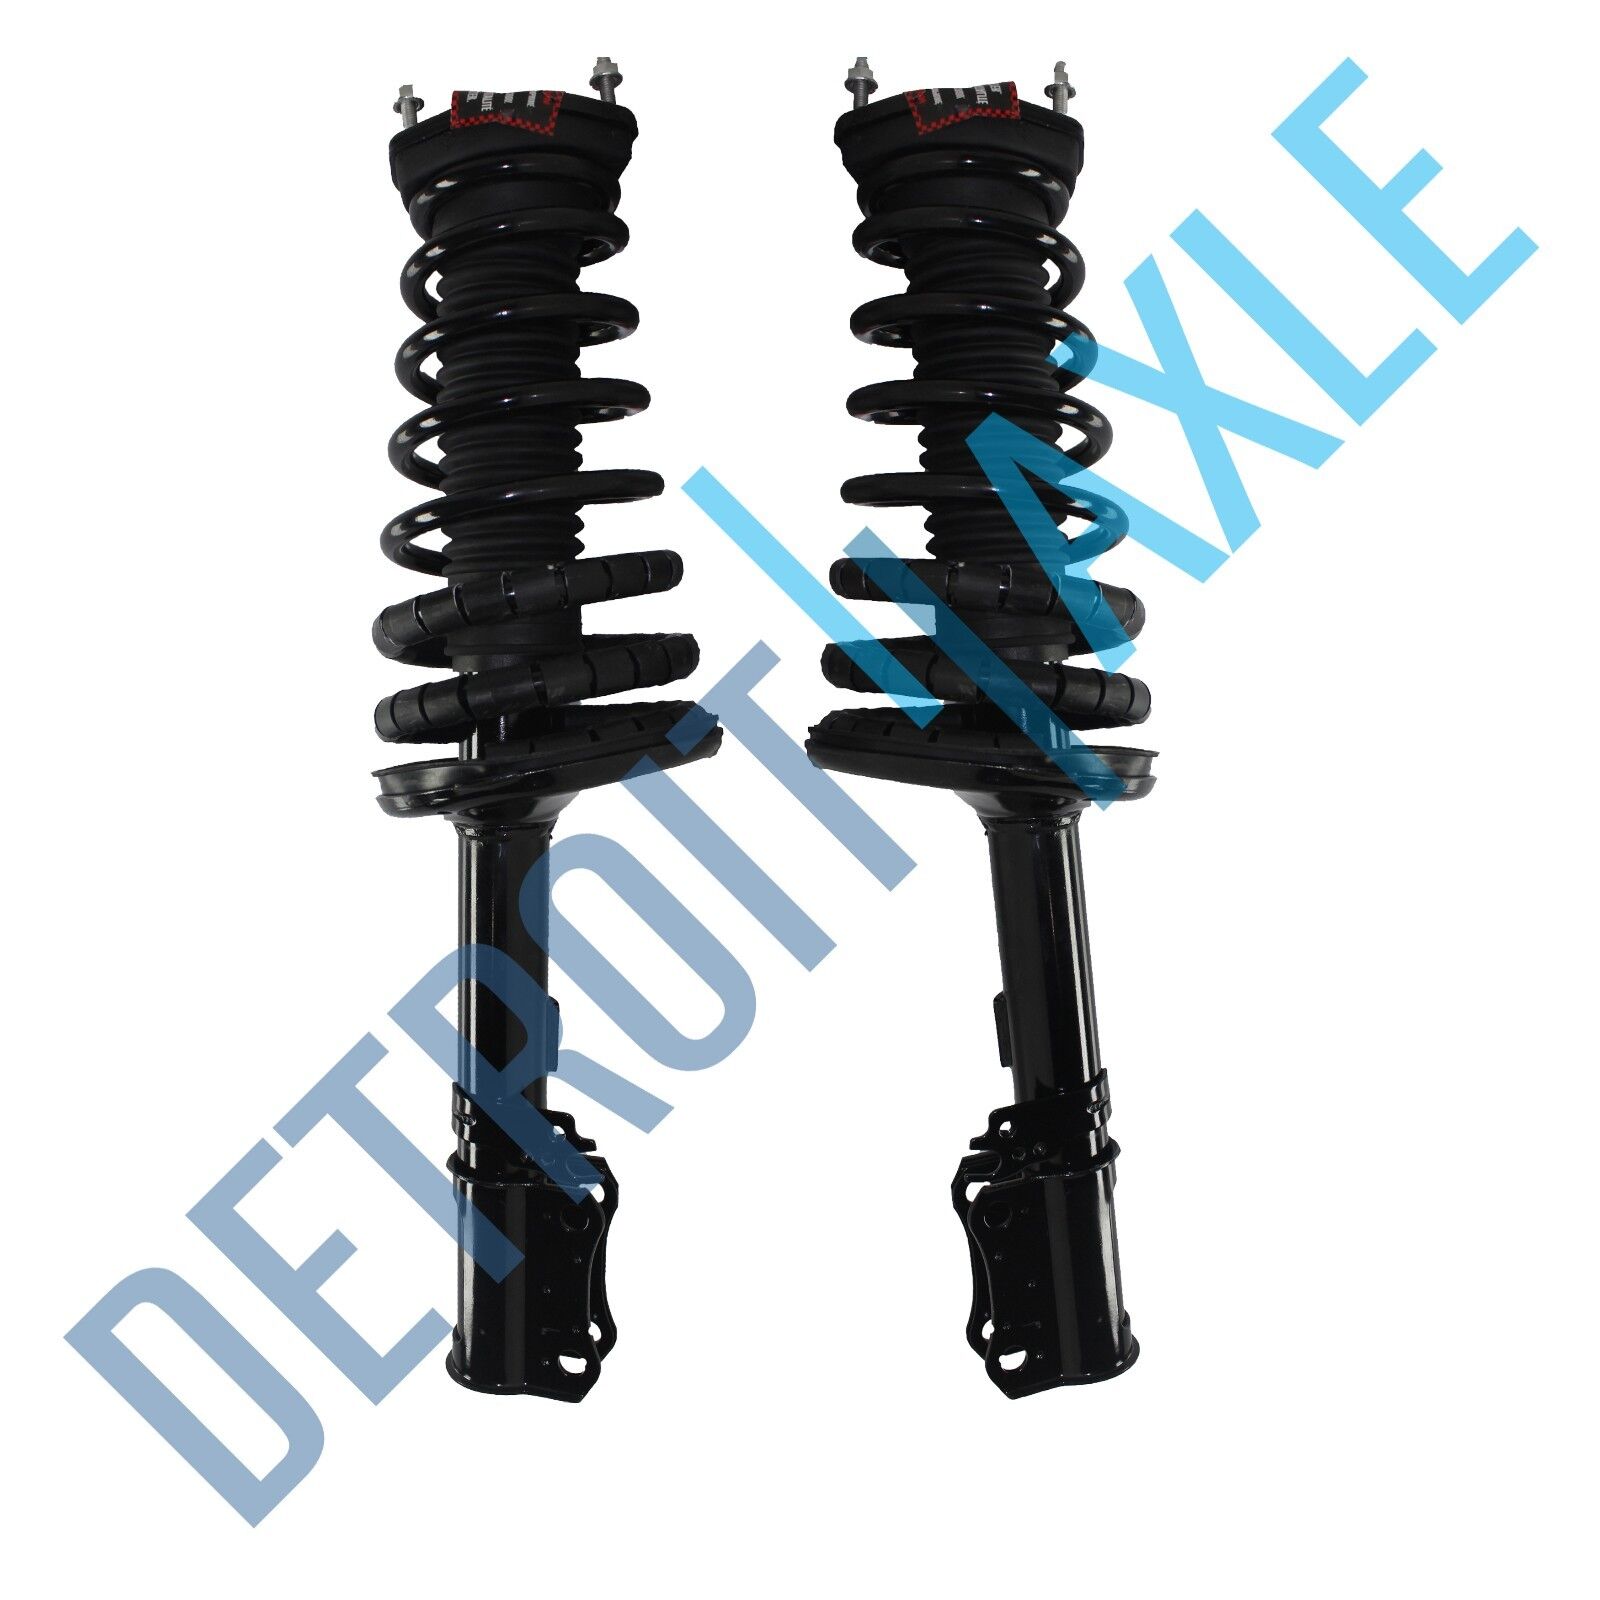 Set of 2: NEW Complete (2) Rear Quick Struts w/Coil Springs for Toyota Camry